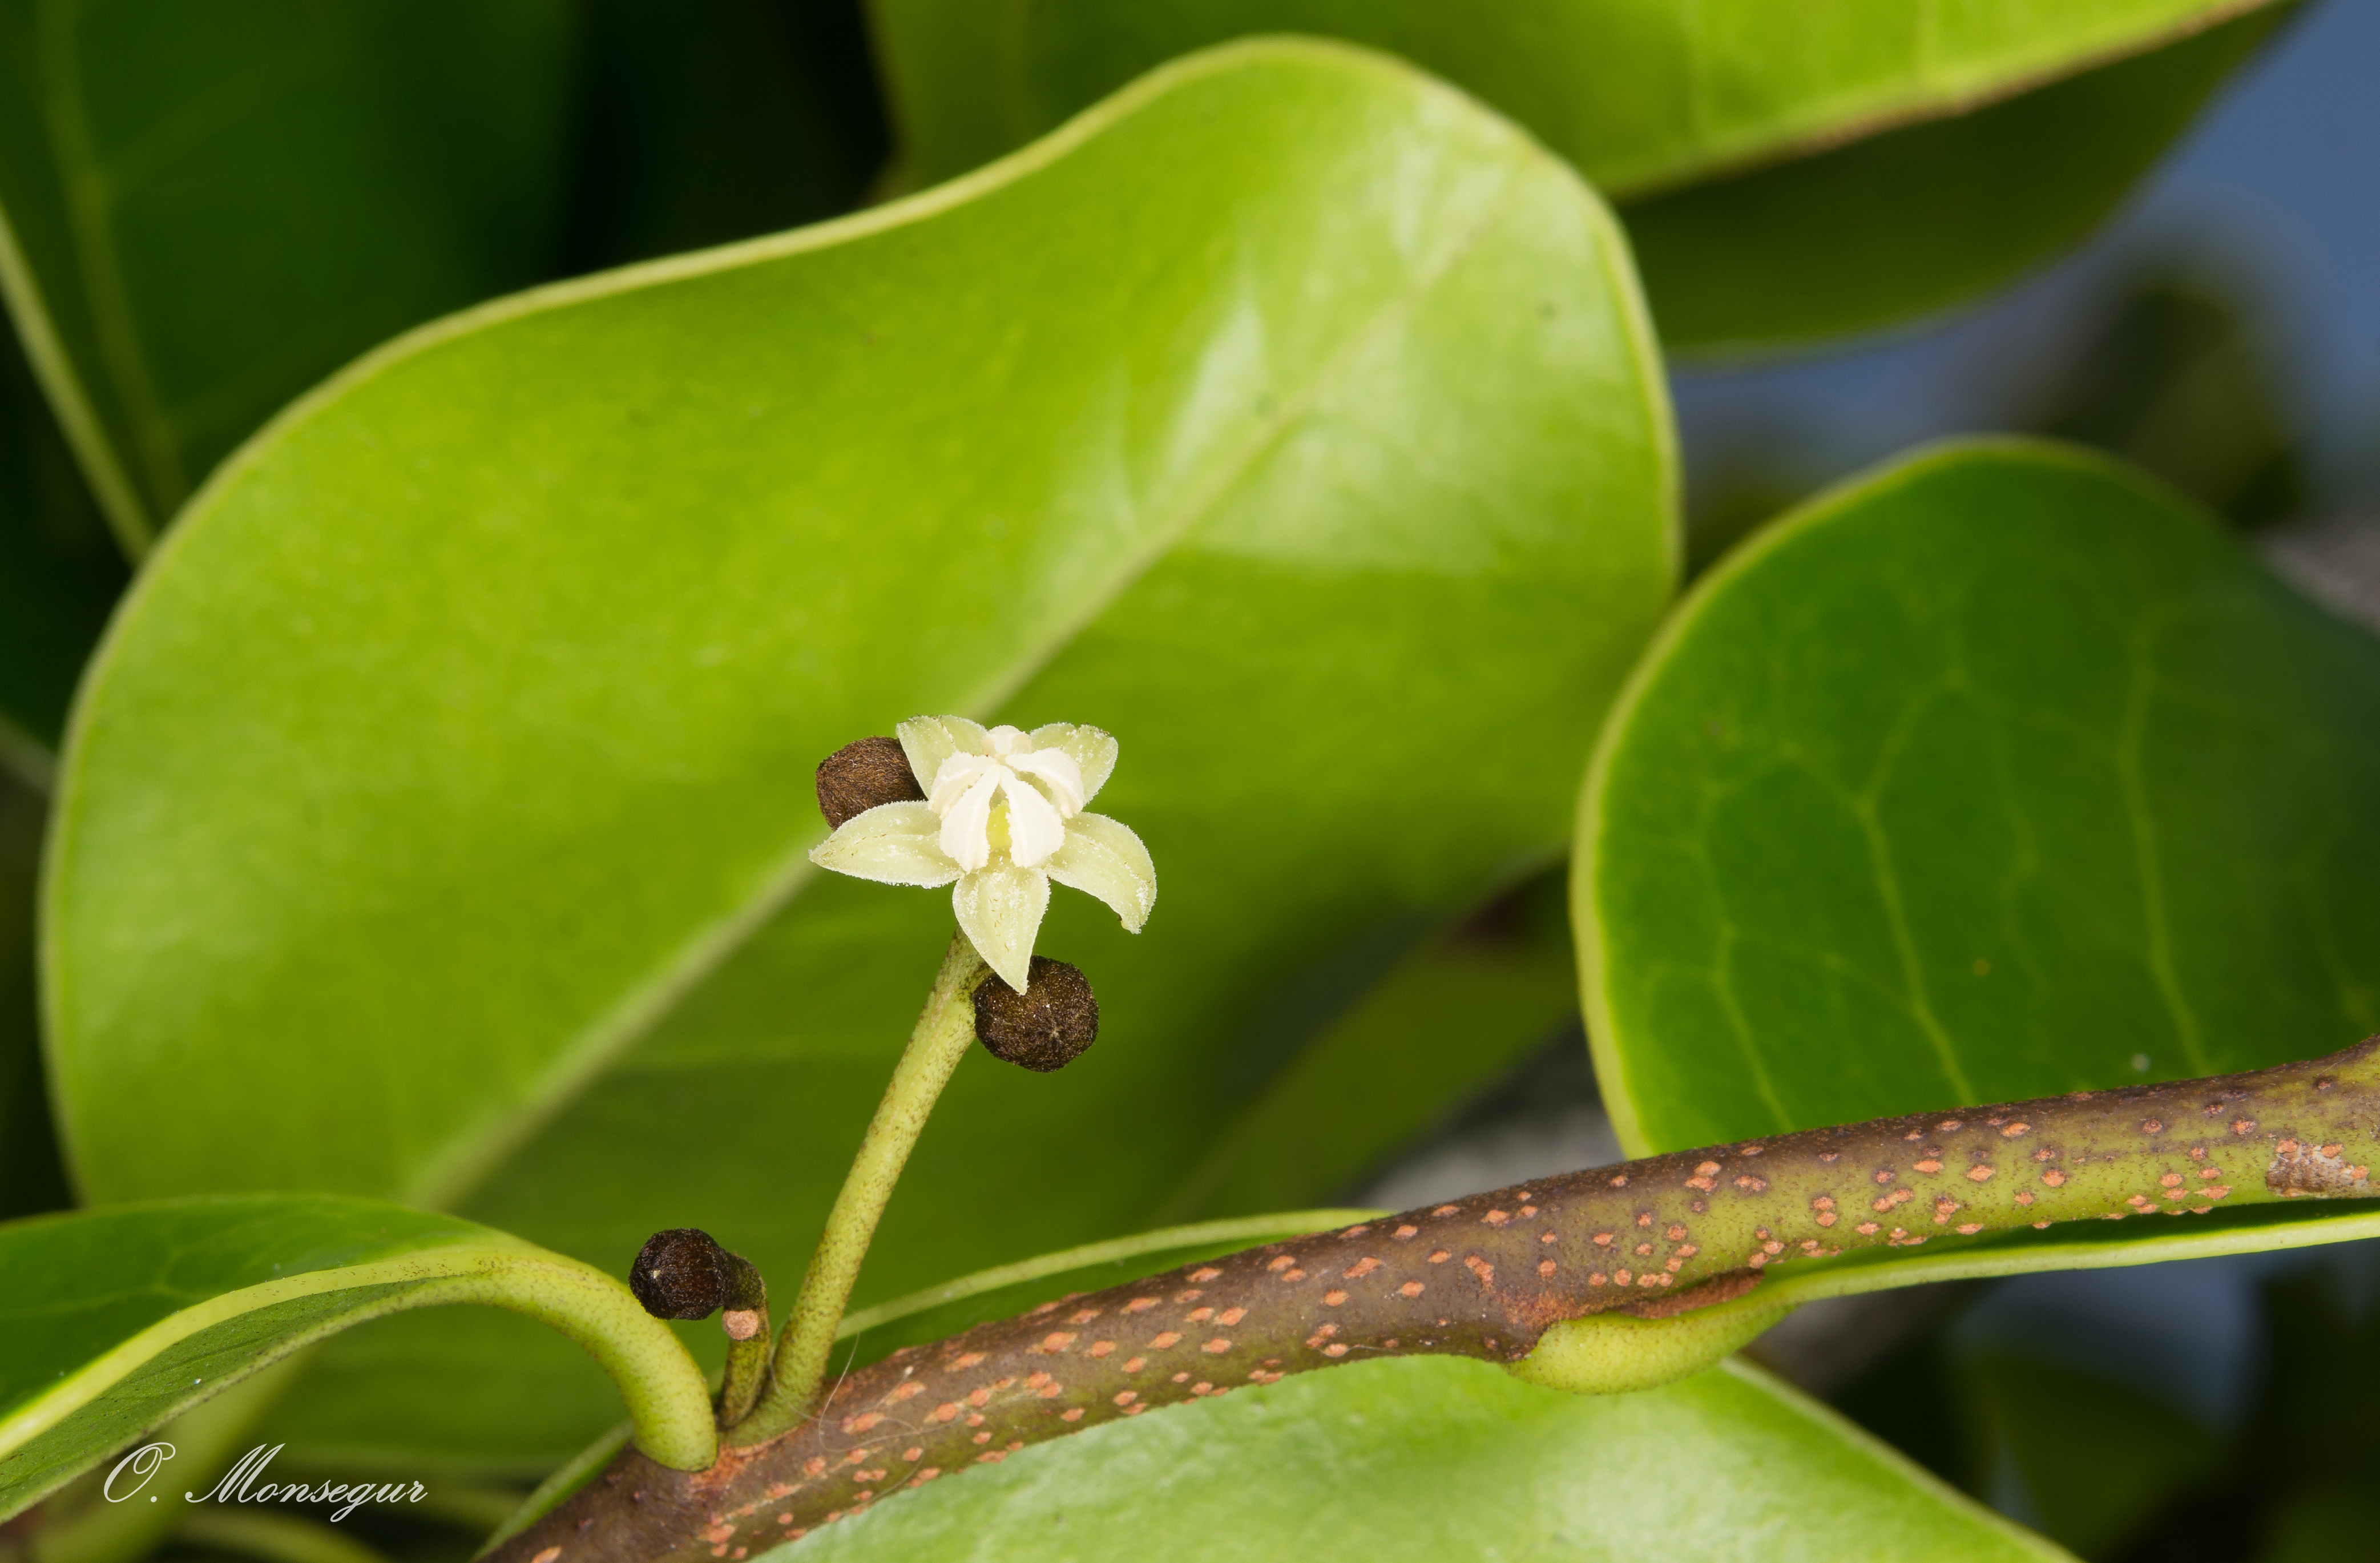 A tiny white flower in bloom among large green leaves.